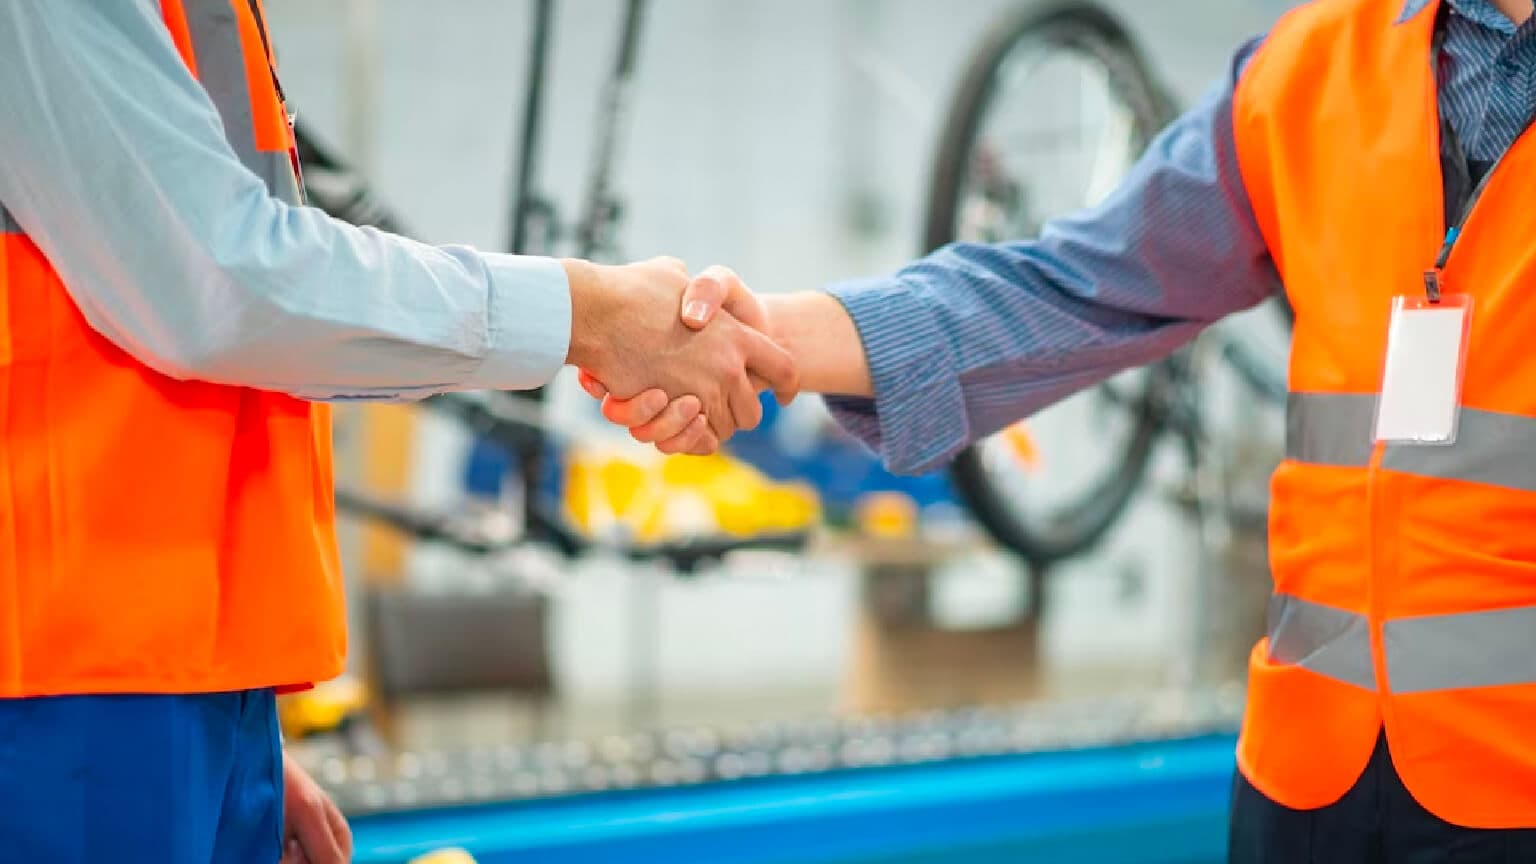 5 Things Procurement Managers Should Know About Supplier Collaborations